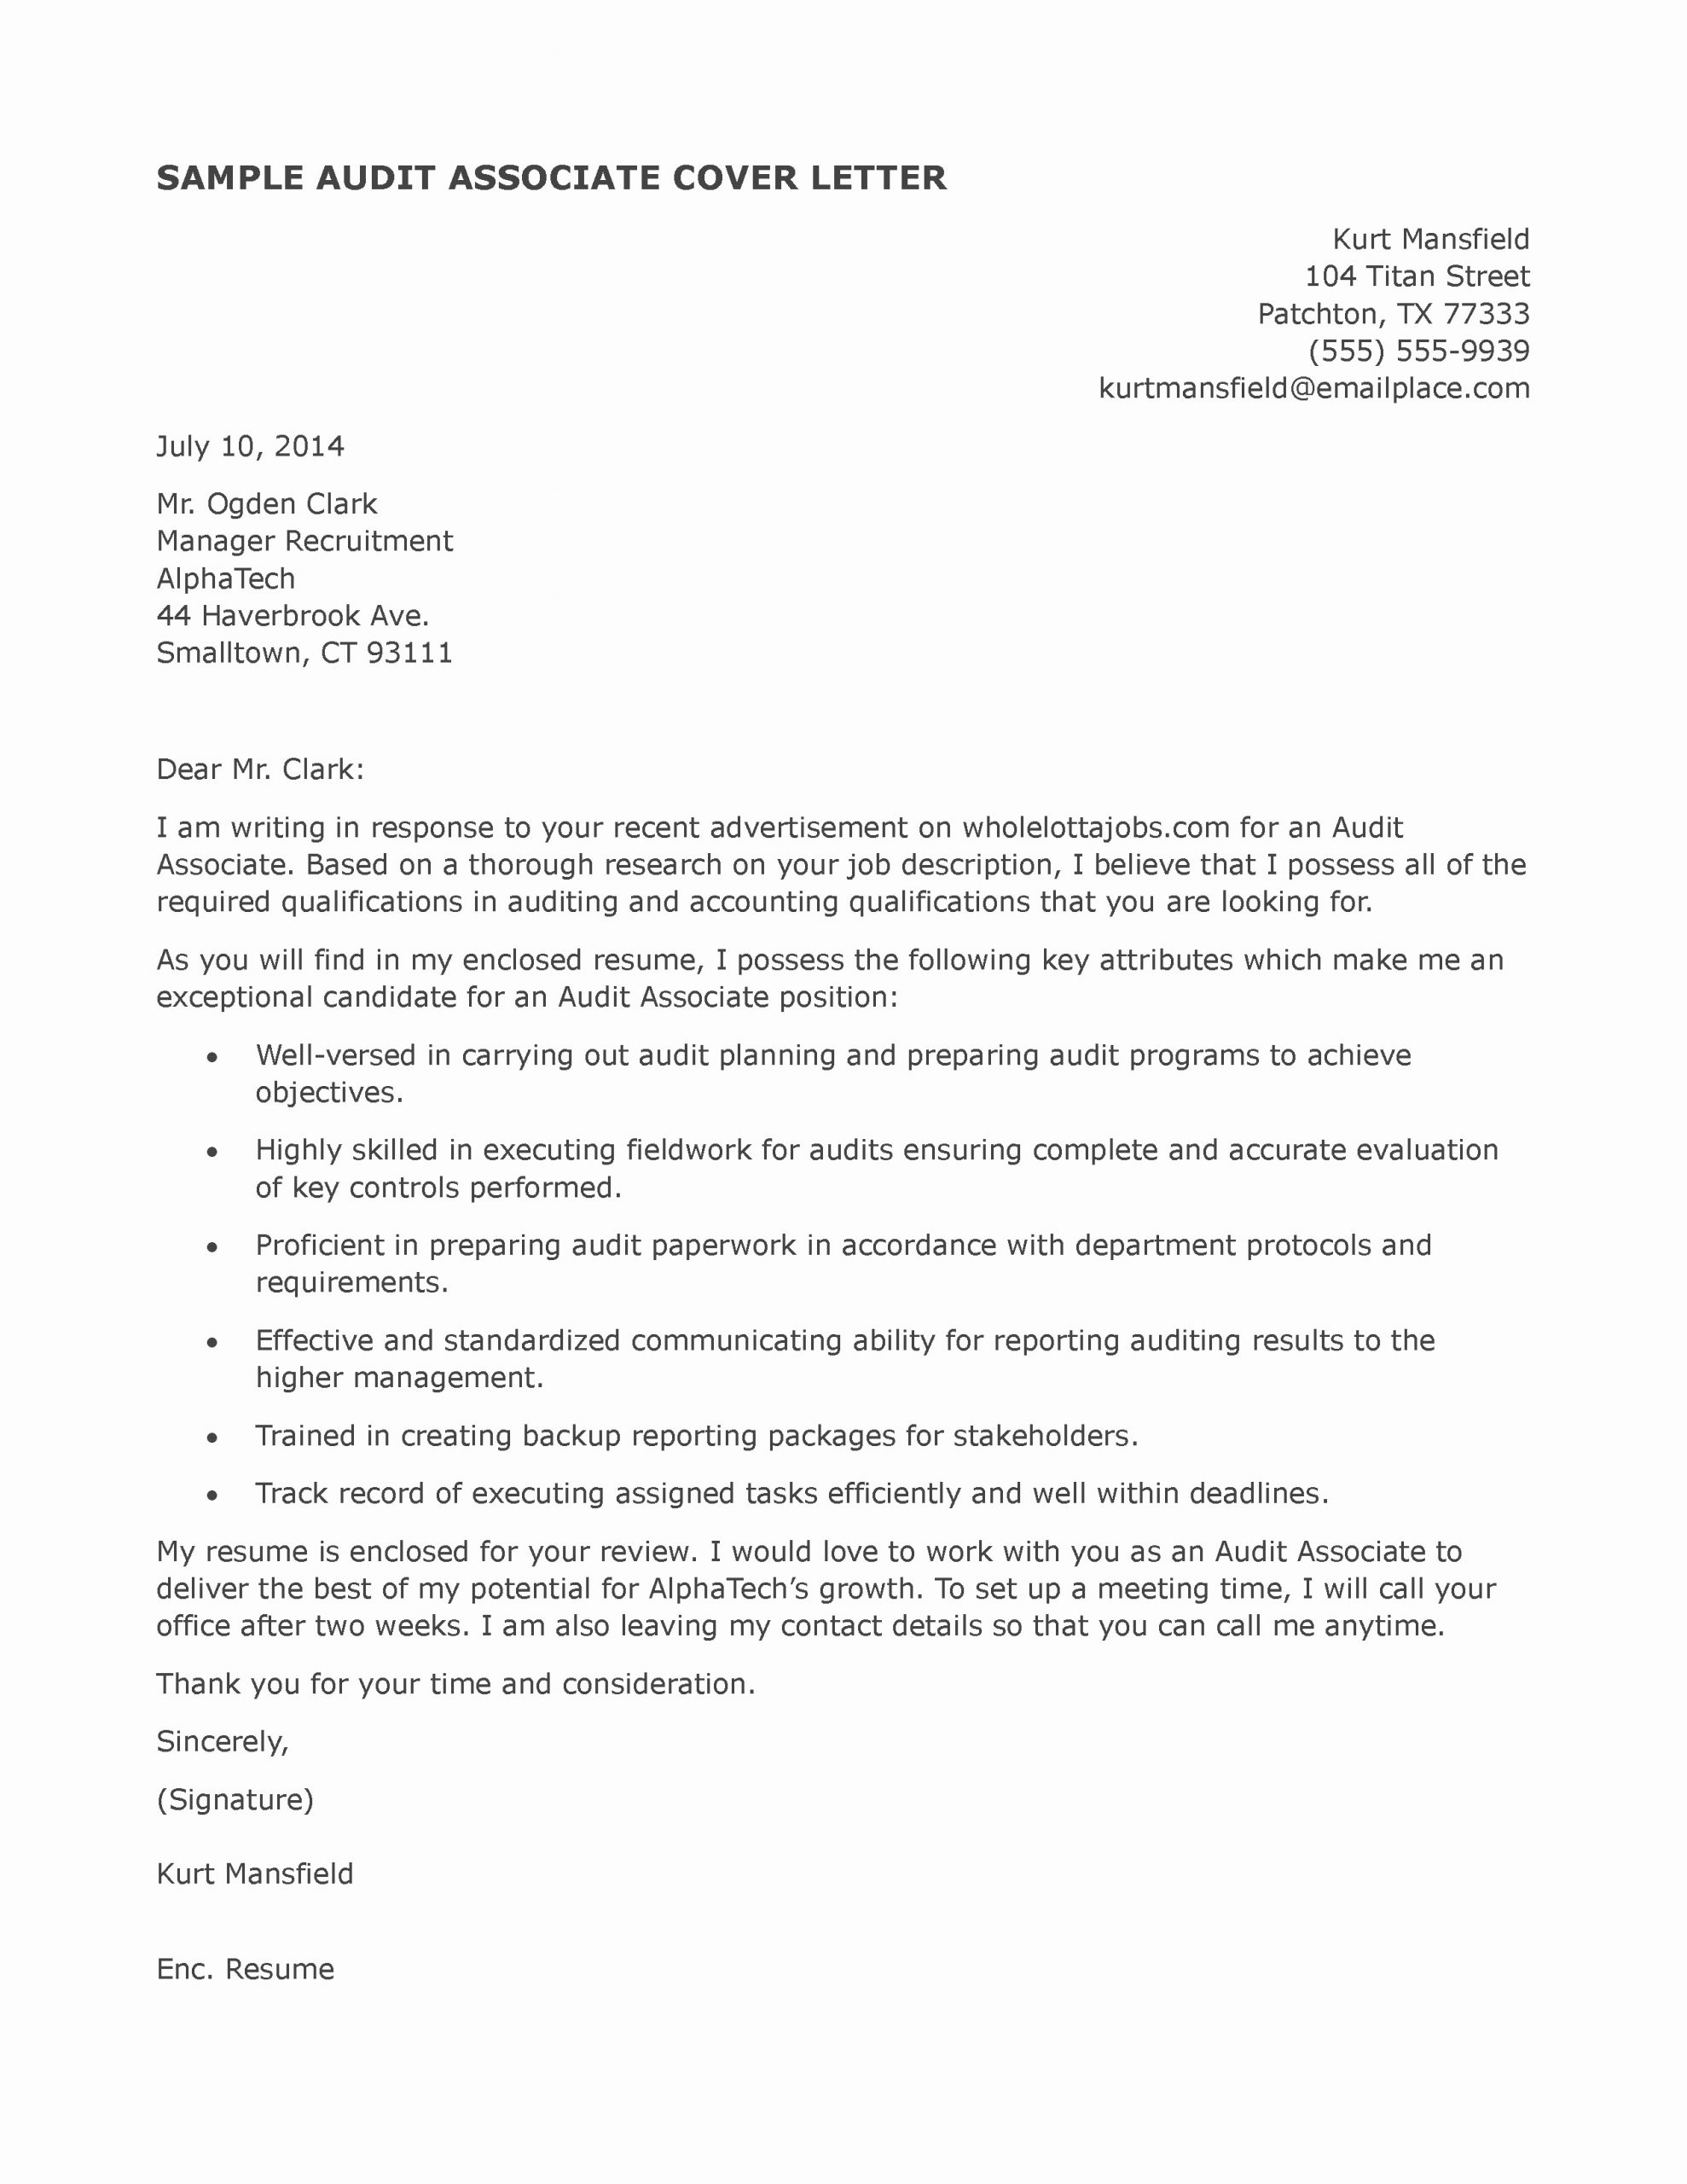 Copy And Paste Cover Letter Akali within dimensions 2550 X 3300